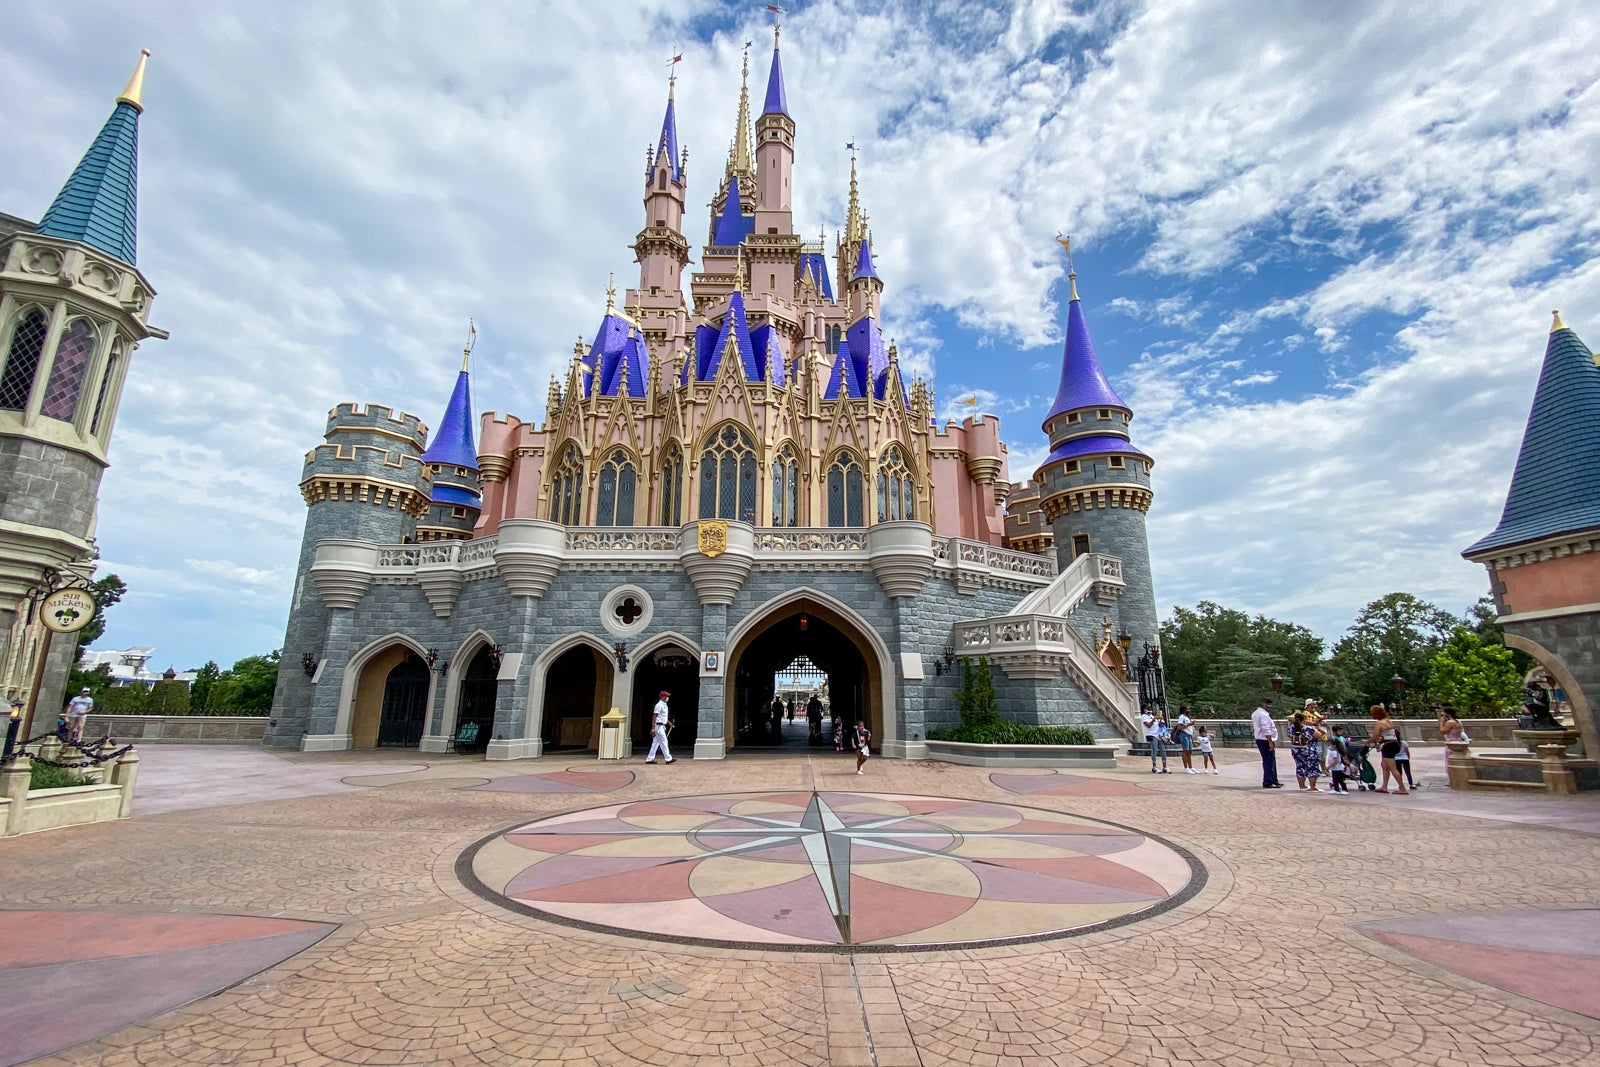 6 ways using an authorized Disney vacation planner will improve your trip - The Points Guy